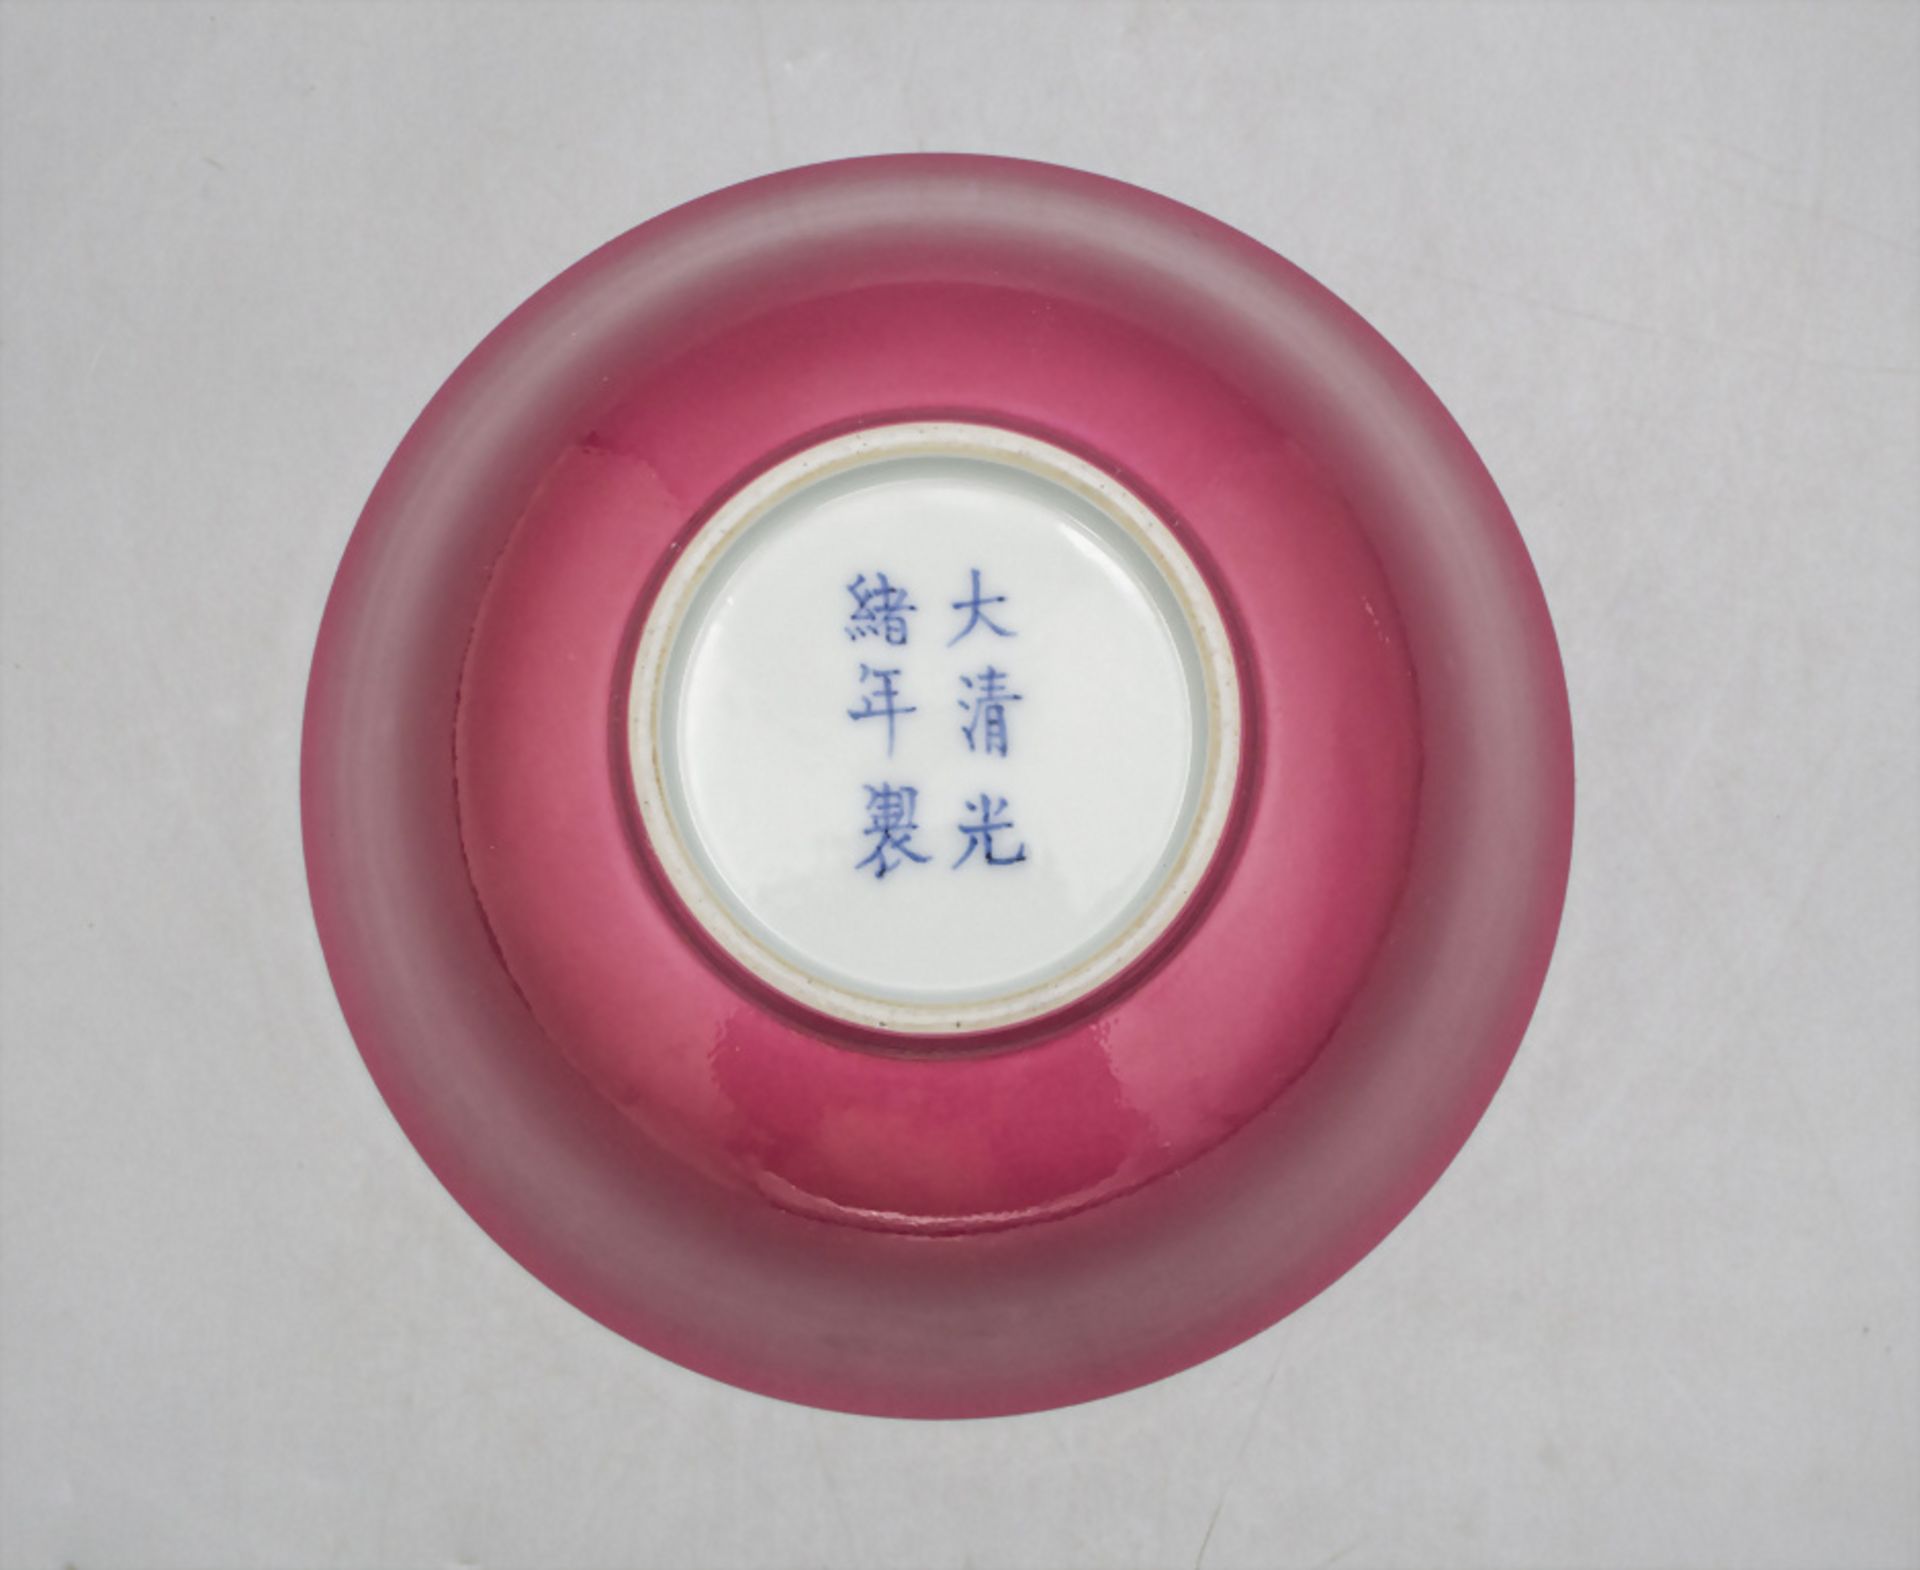 Rosarote Schale / A pinkish-red bowl, China, Beginn 20. Jh. - Image 2 of 2